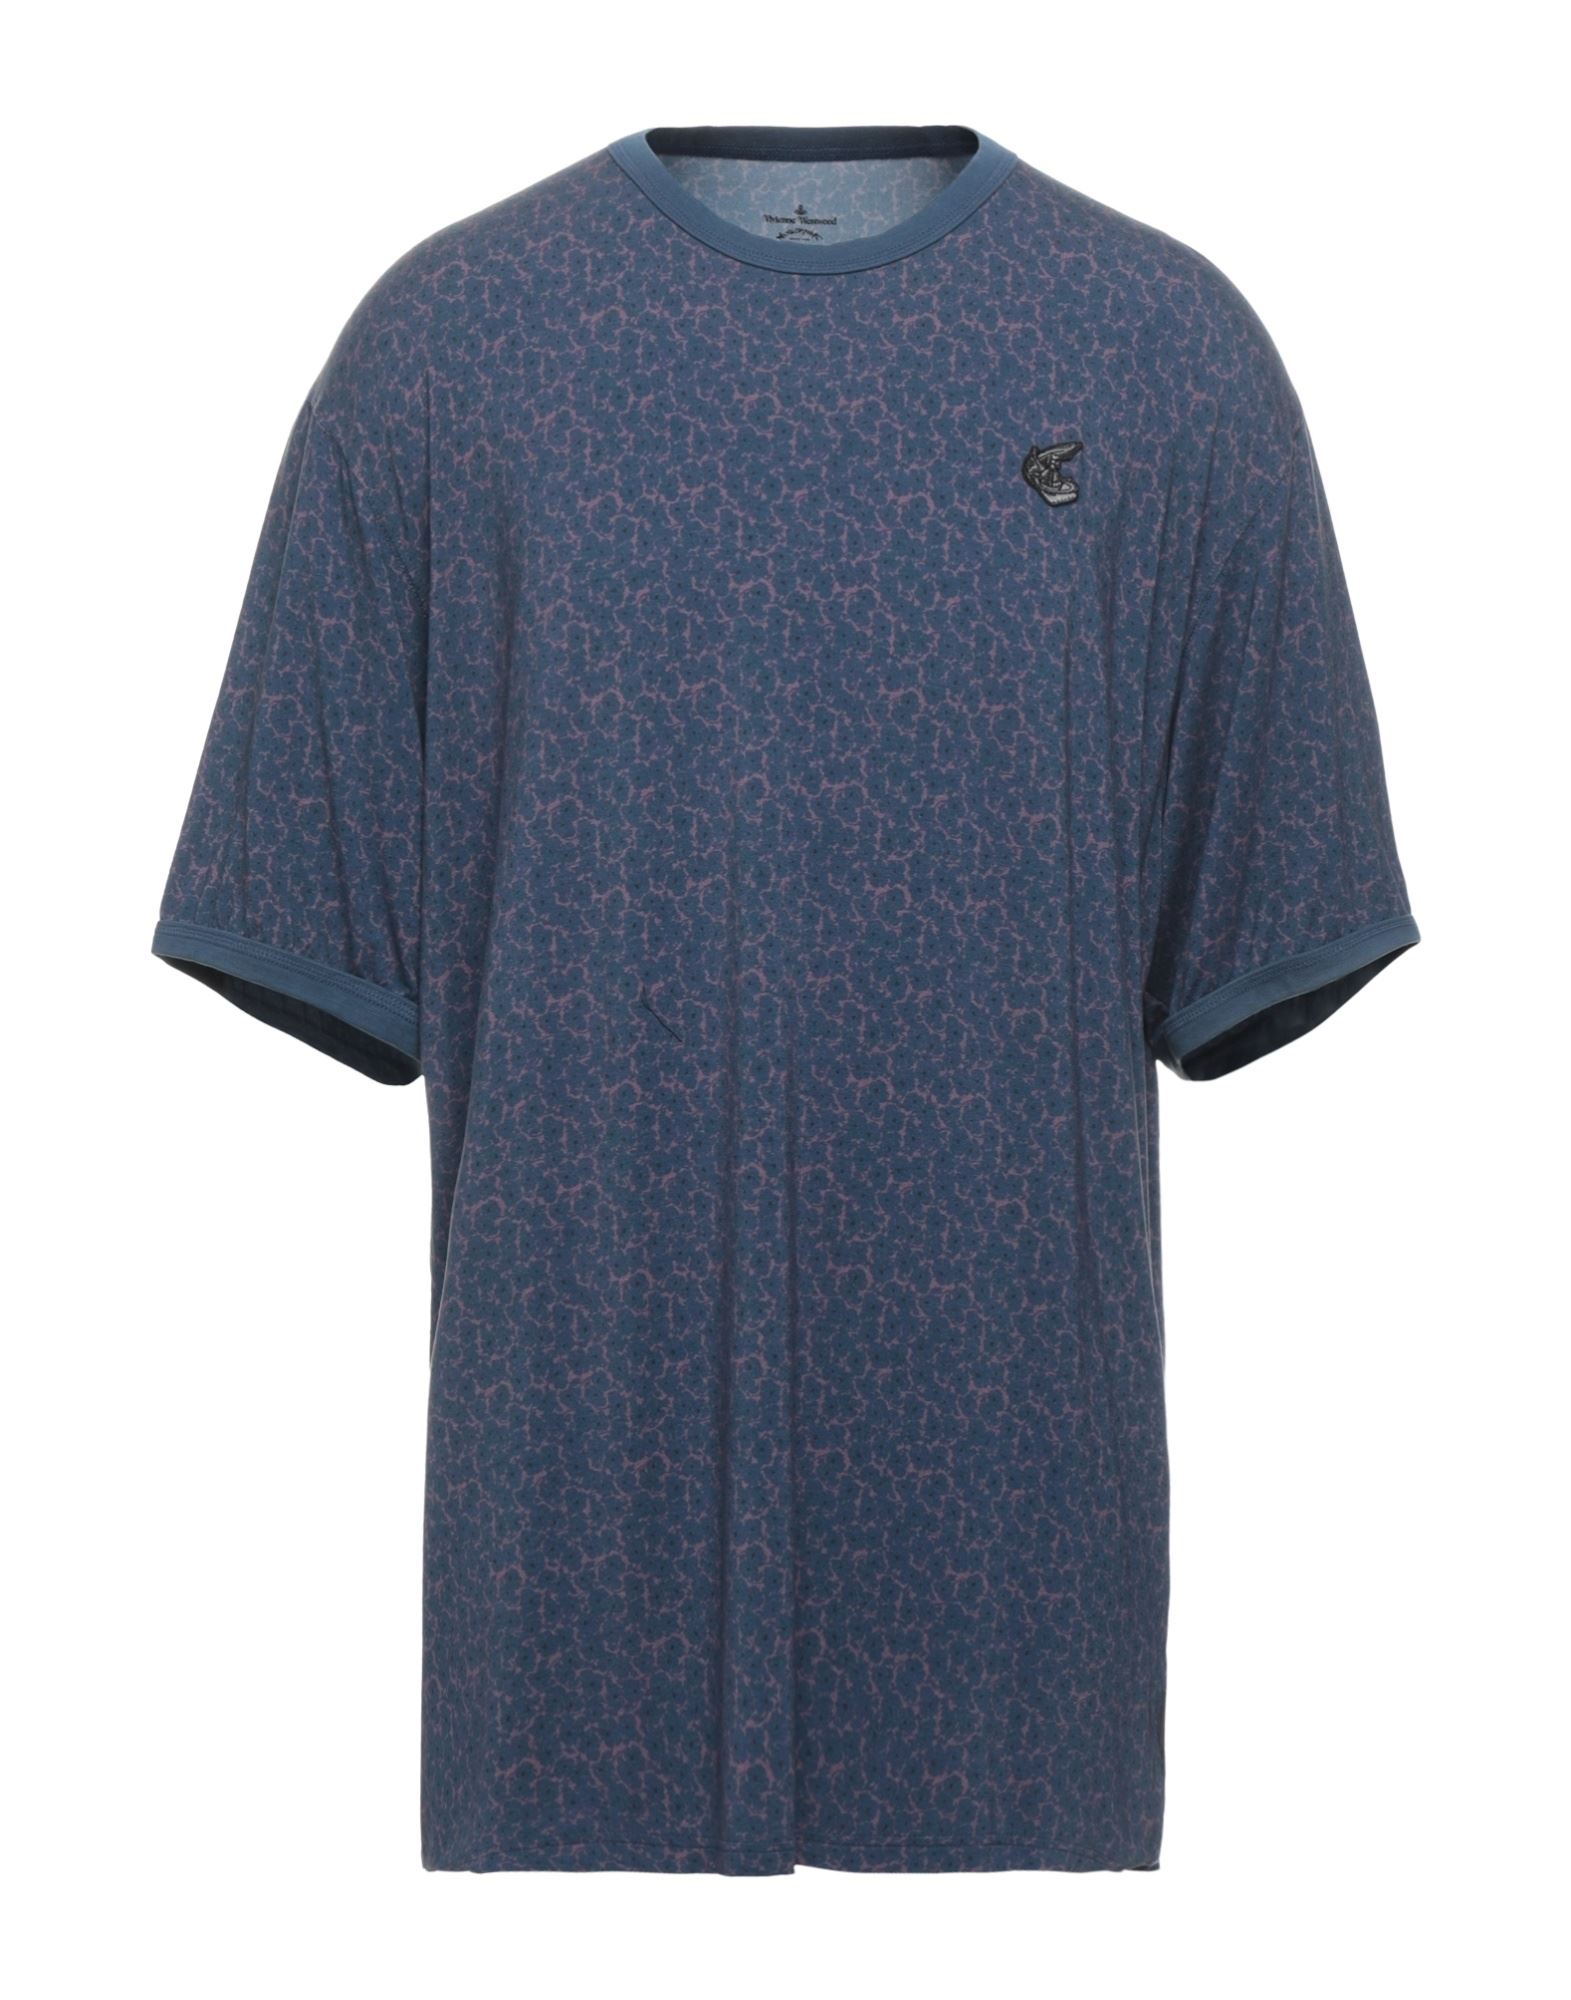 Vivienne Westwood Anglomania T-shirts In Slate Blue